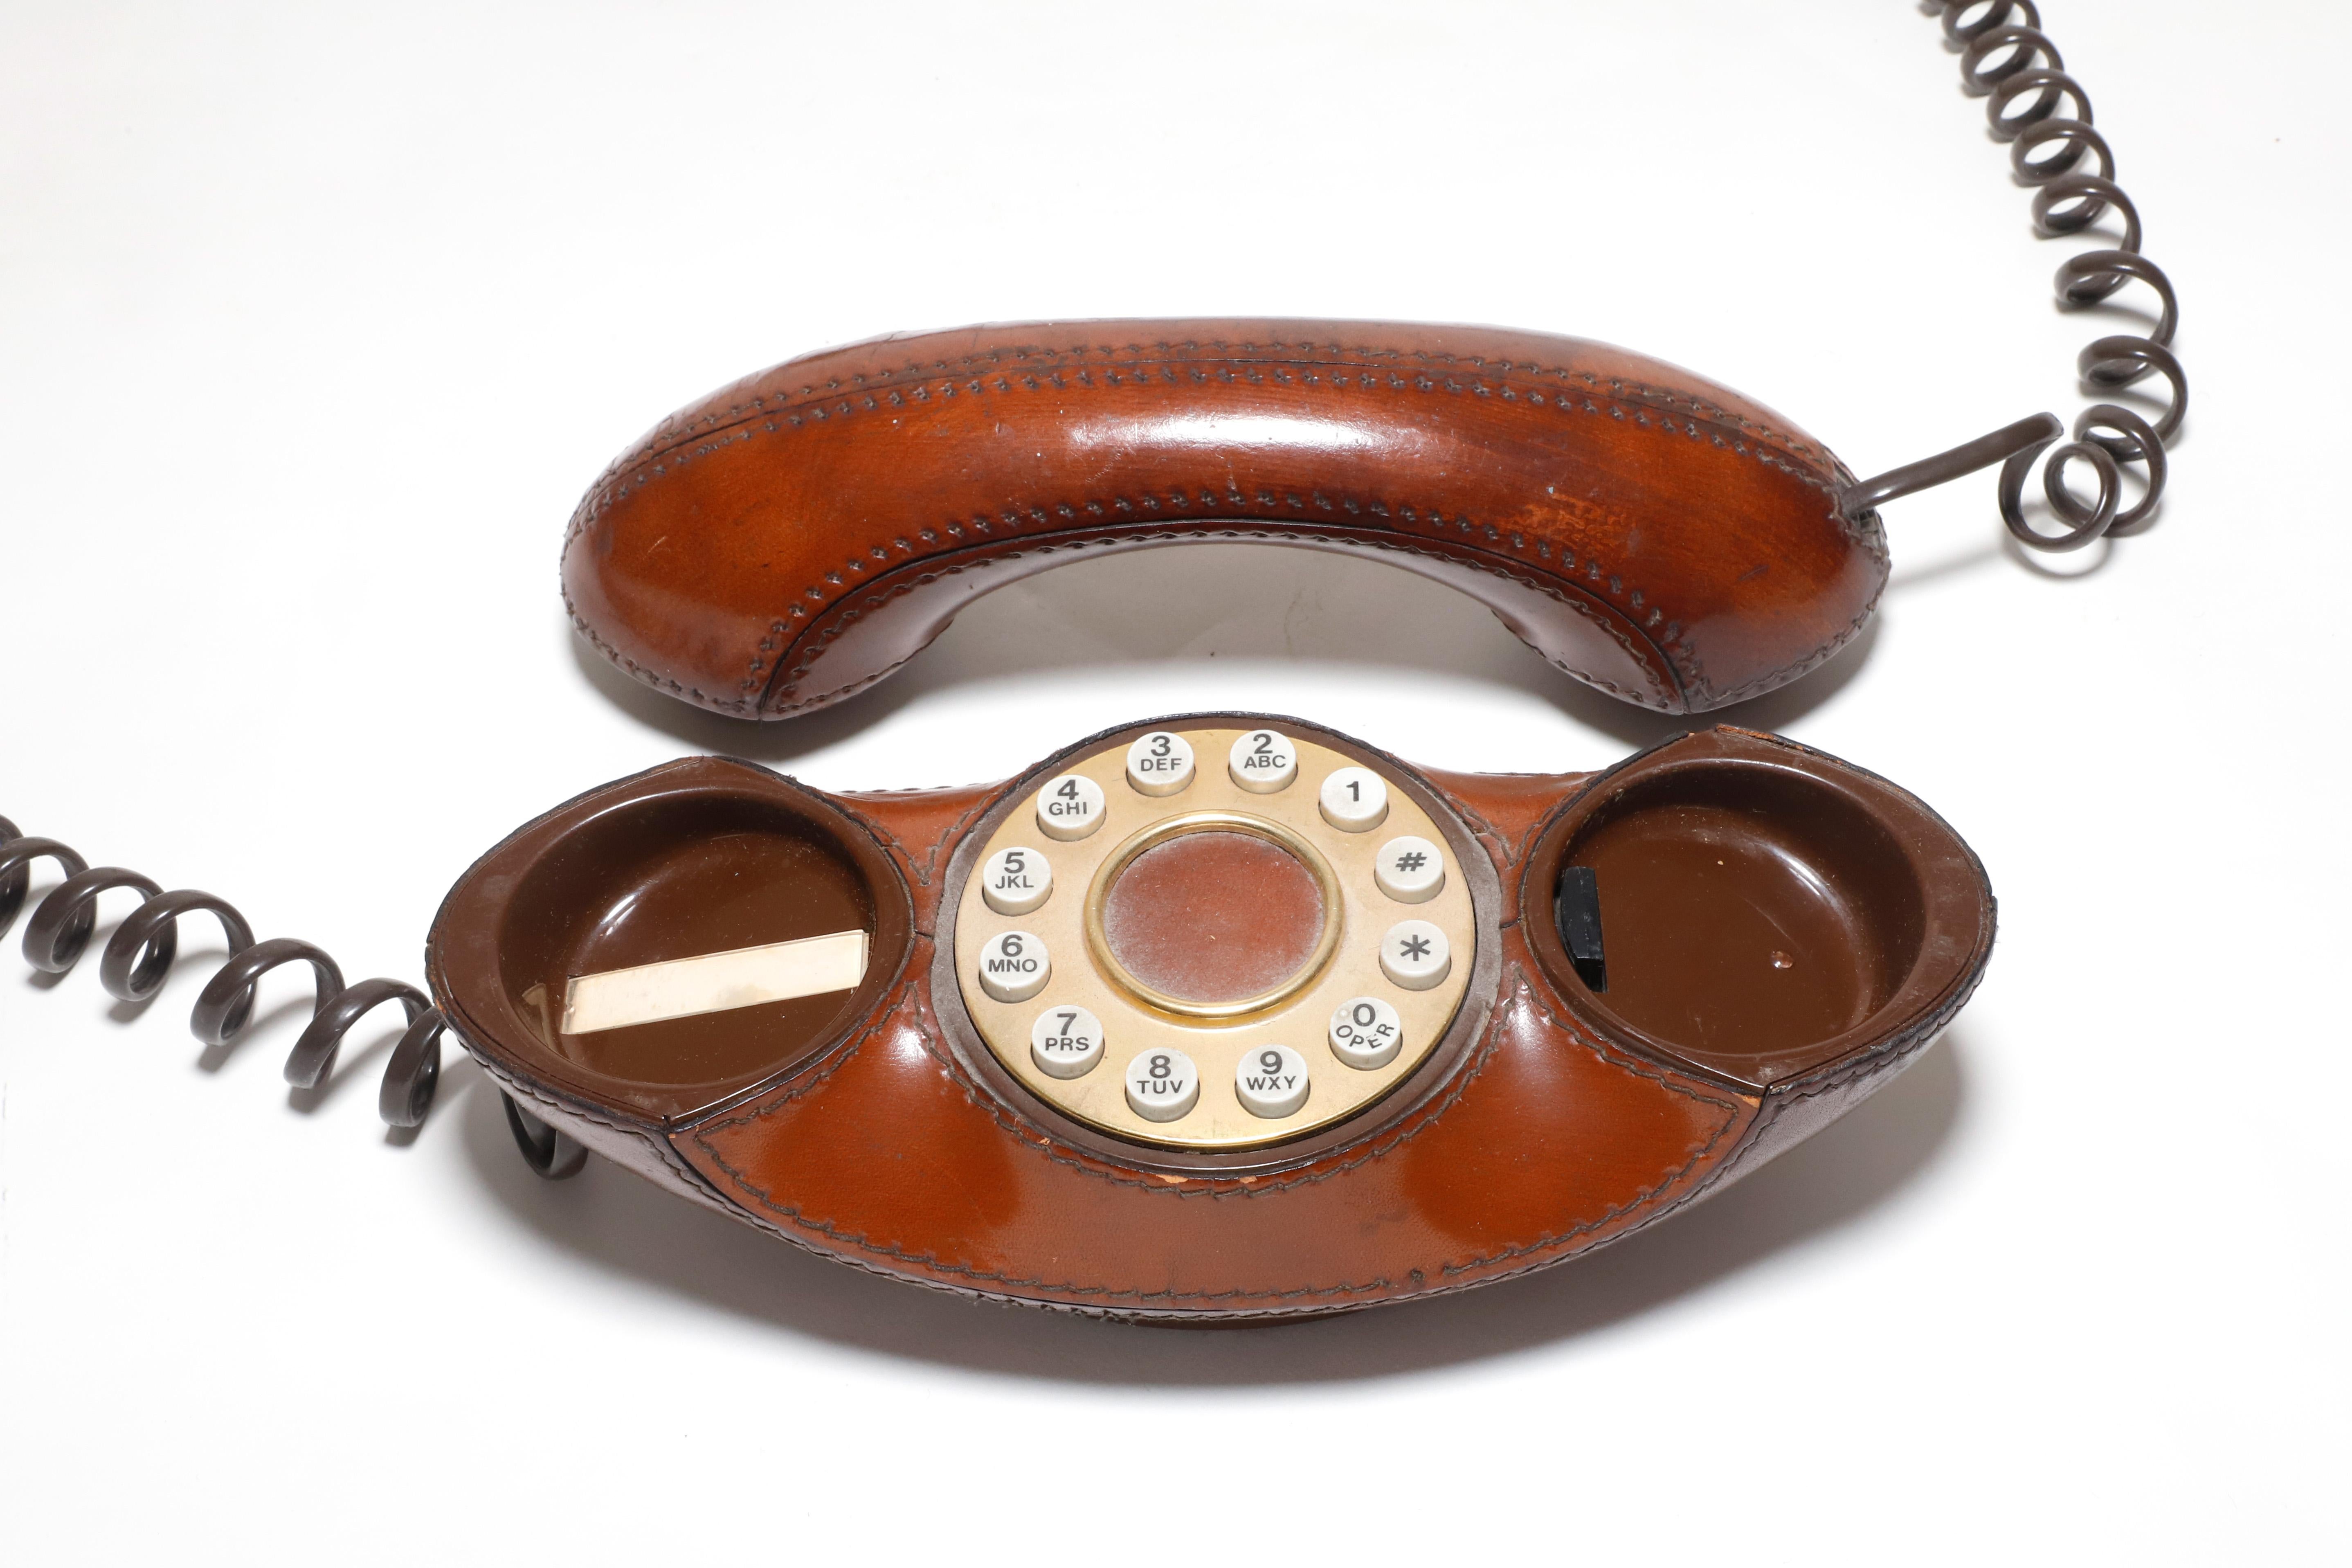 American Vintage Genie 1970s Retro Brown Leather Push Butoon Telephone For Sale